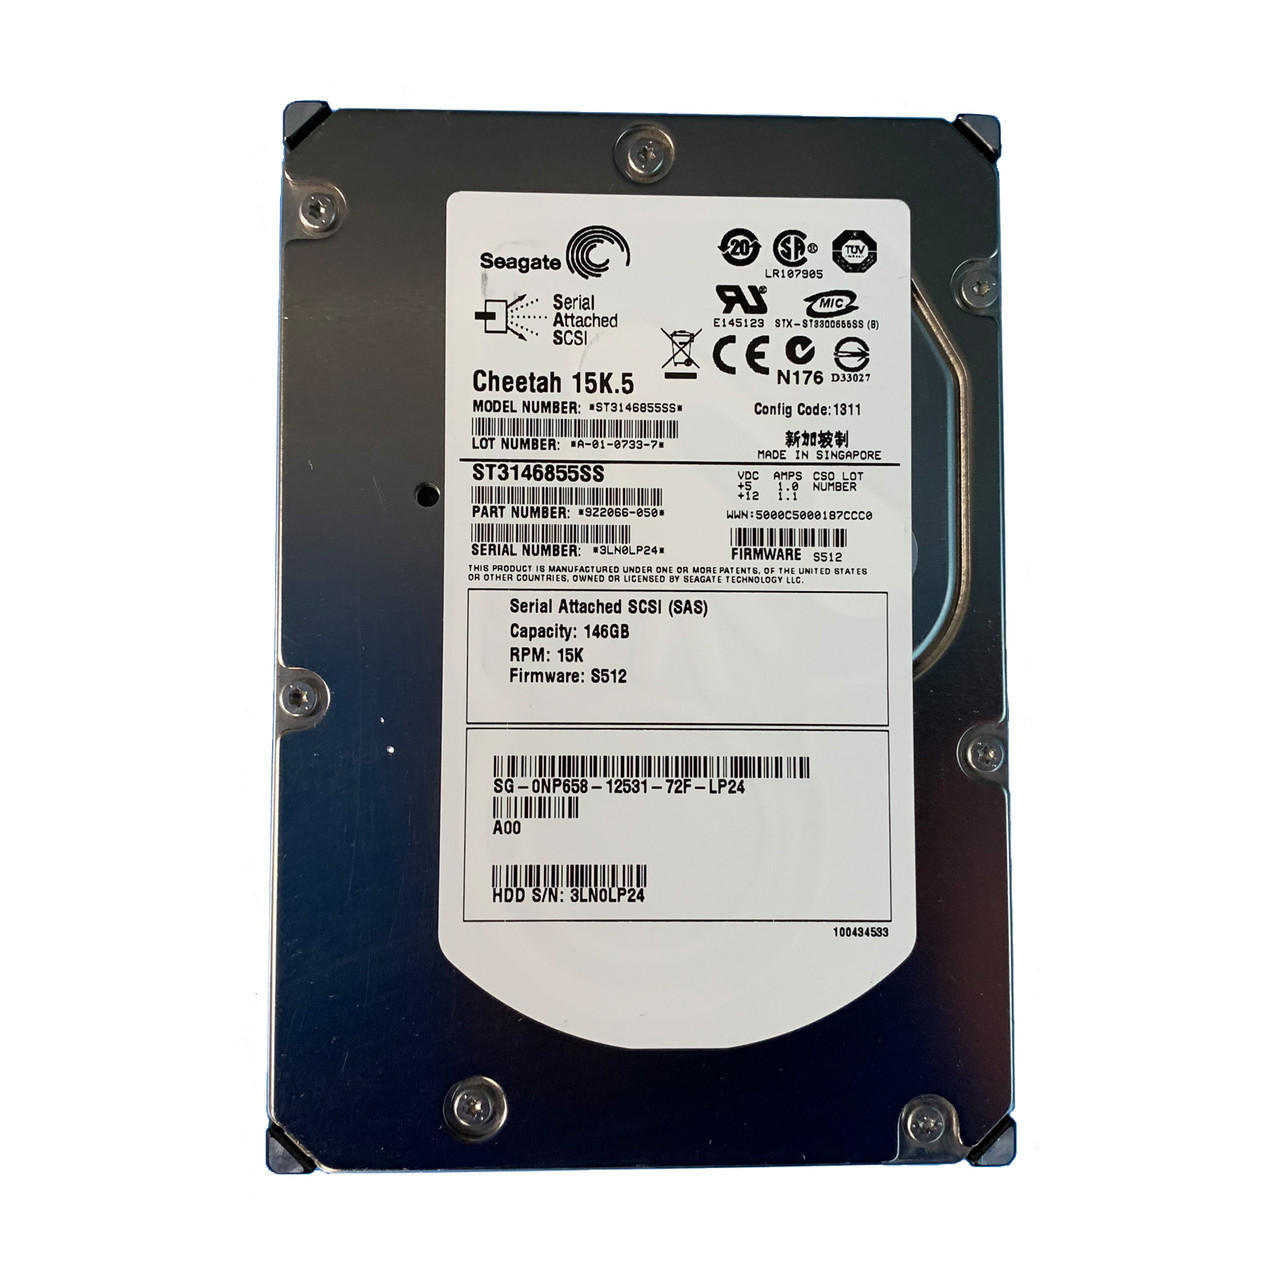 Dell NP658 146GB SAS 15K 3GBPS 3.5" Drive 9Z2066-050 ST3146855SS